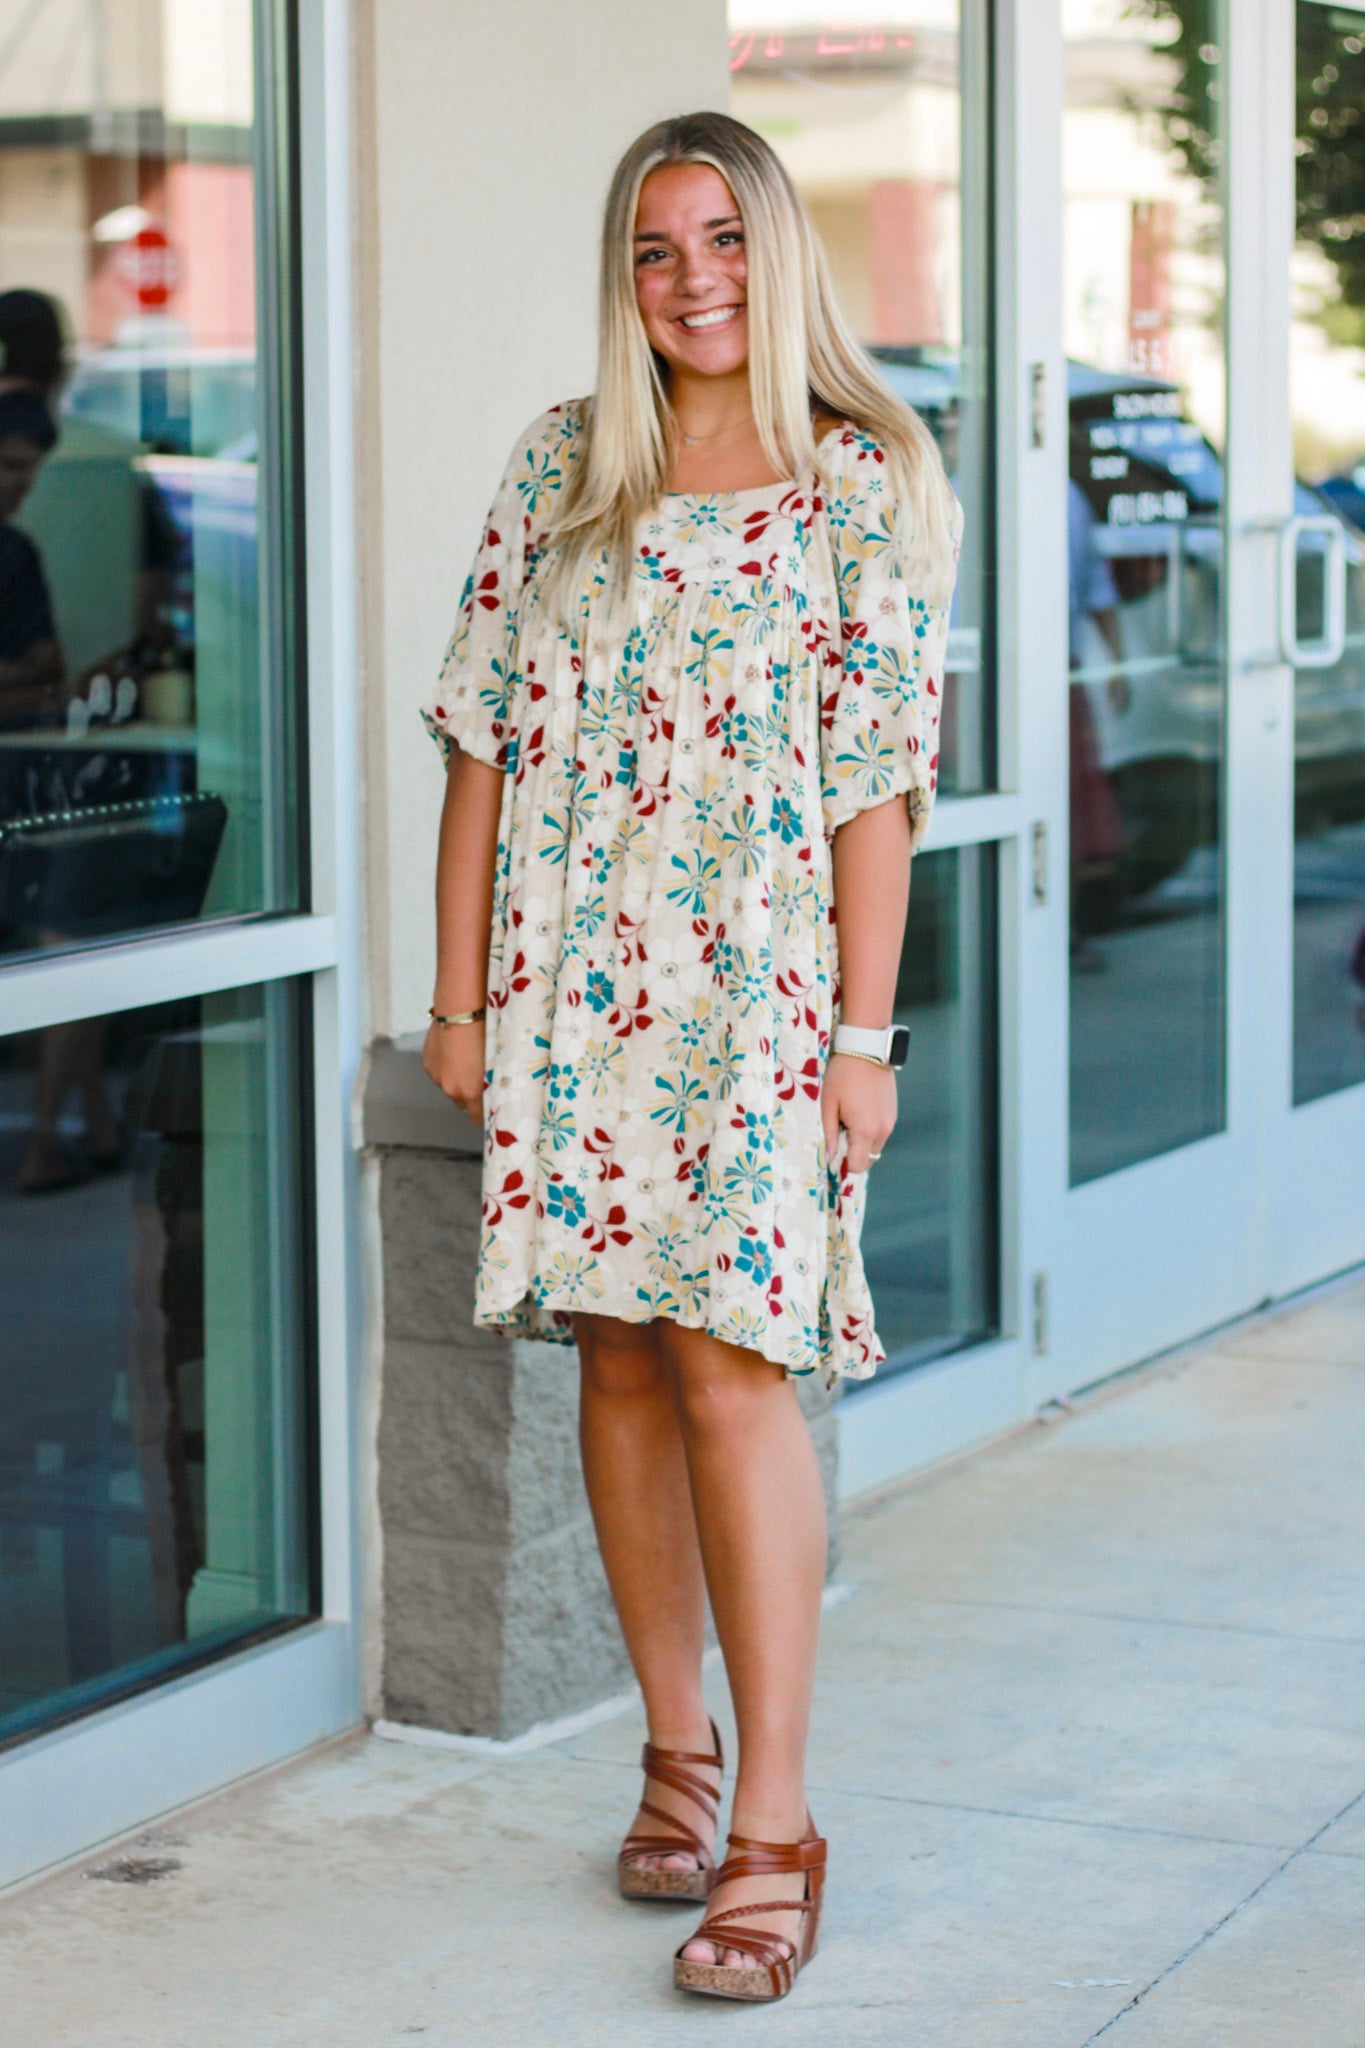 Fun For All Fall Floral Dress